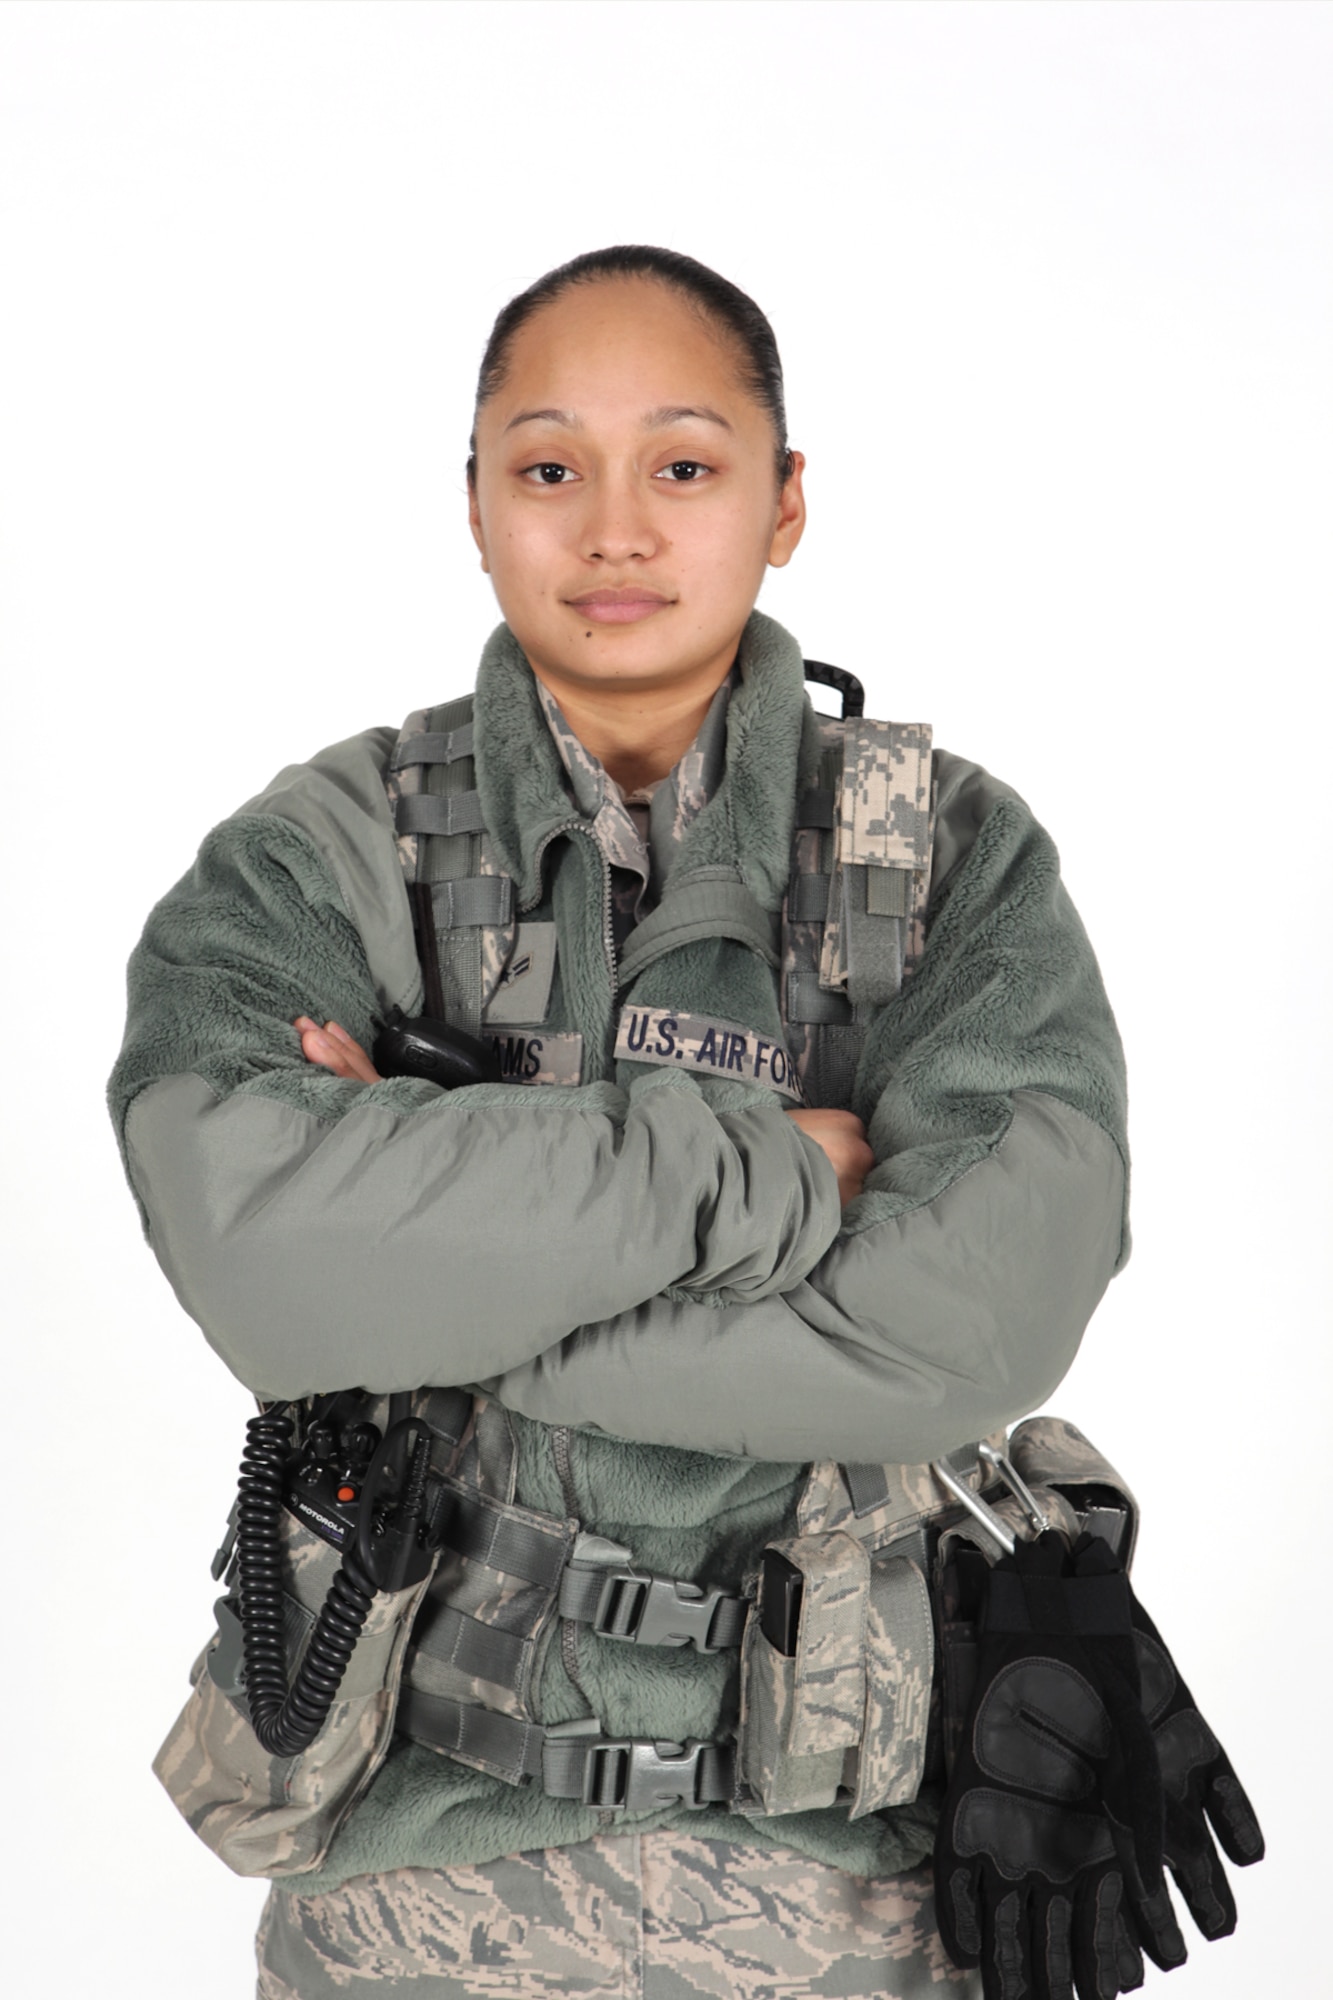 140209-Z-EZ686-084 – Airman 1st Class Sarah Adams is seen in her equipment used as a member of the 127th Security Forces Squadron at Selfridge Air National Guard Base, Mich., Feb. 9, 2014. Adams was born in the Philippines and moved to Michigan when she began college. She said she found a sense of belonging and direction when she joined the Air National Guard. (U.S. Air National Guard photo by MSgt. David Kujawa / Released)